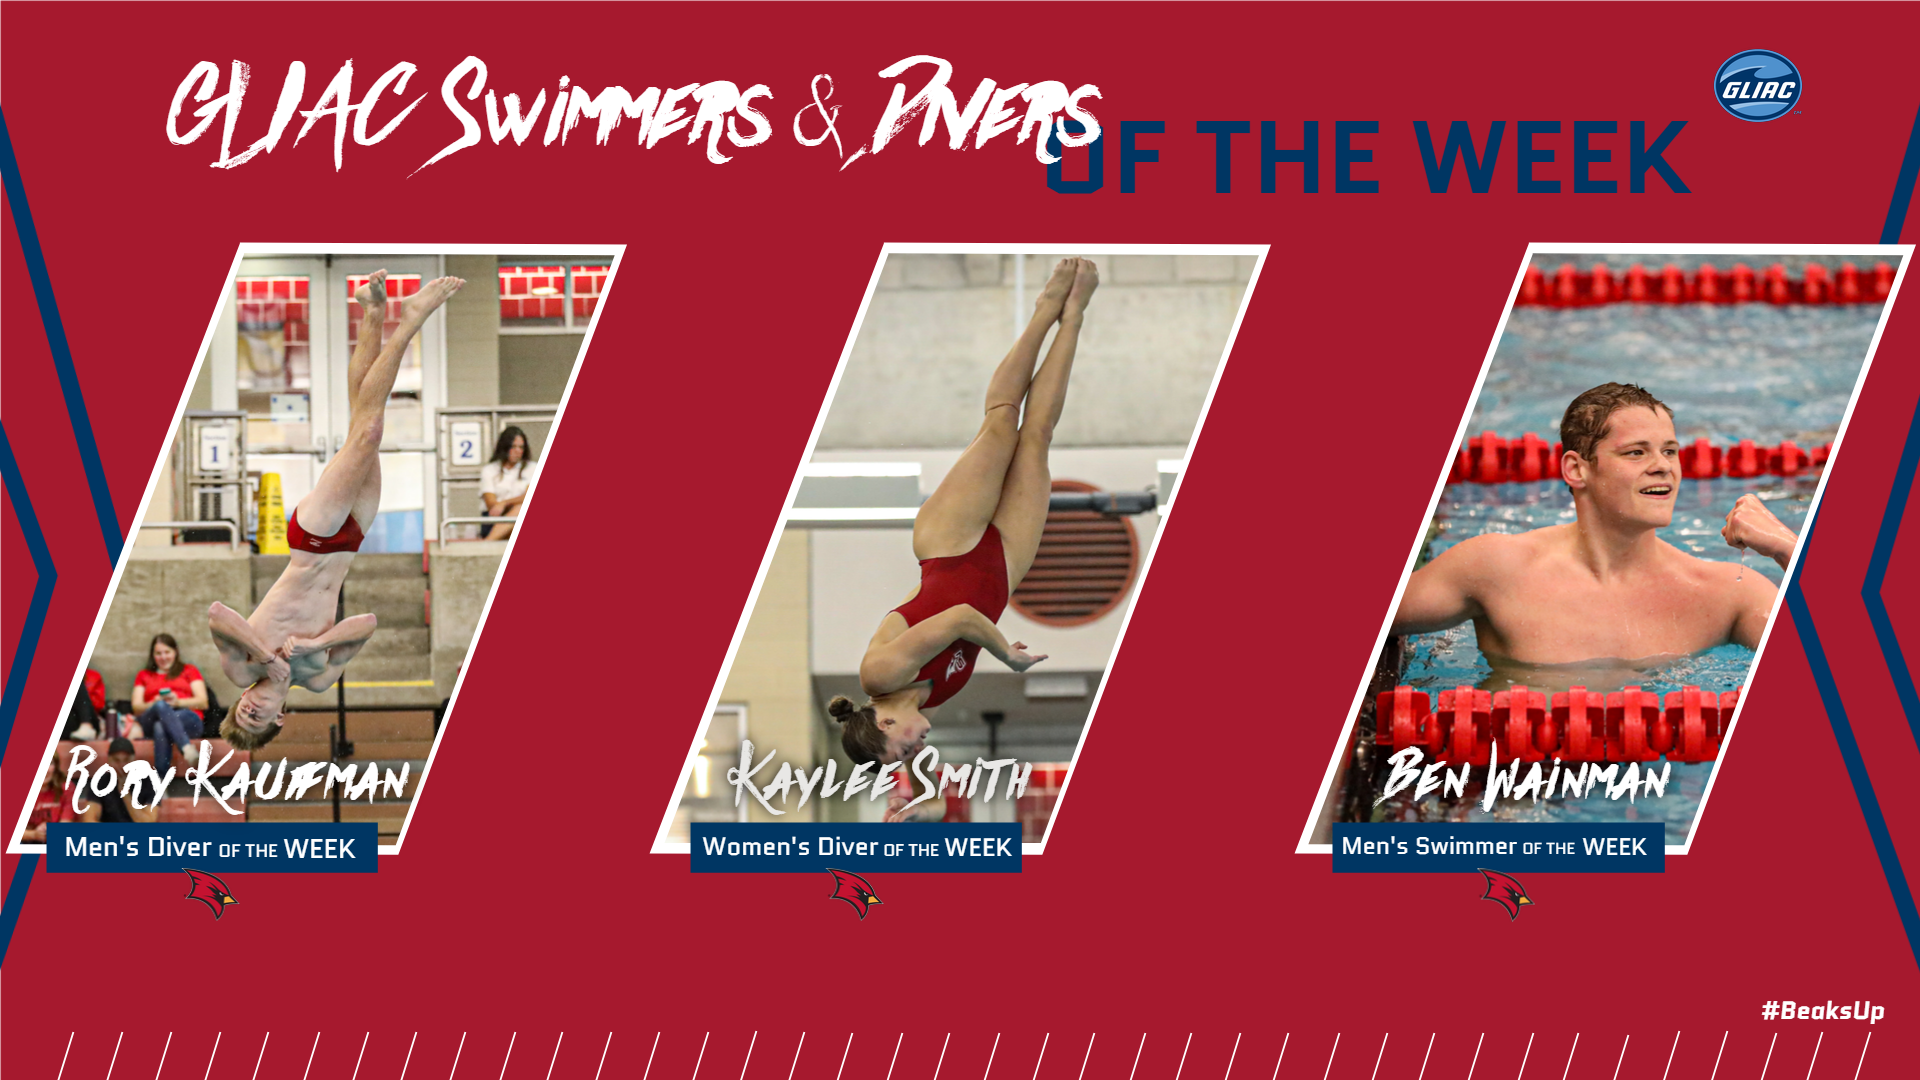 Three Cardinals Earn GLIAC Athletes of the Week for Swim & Dive